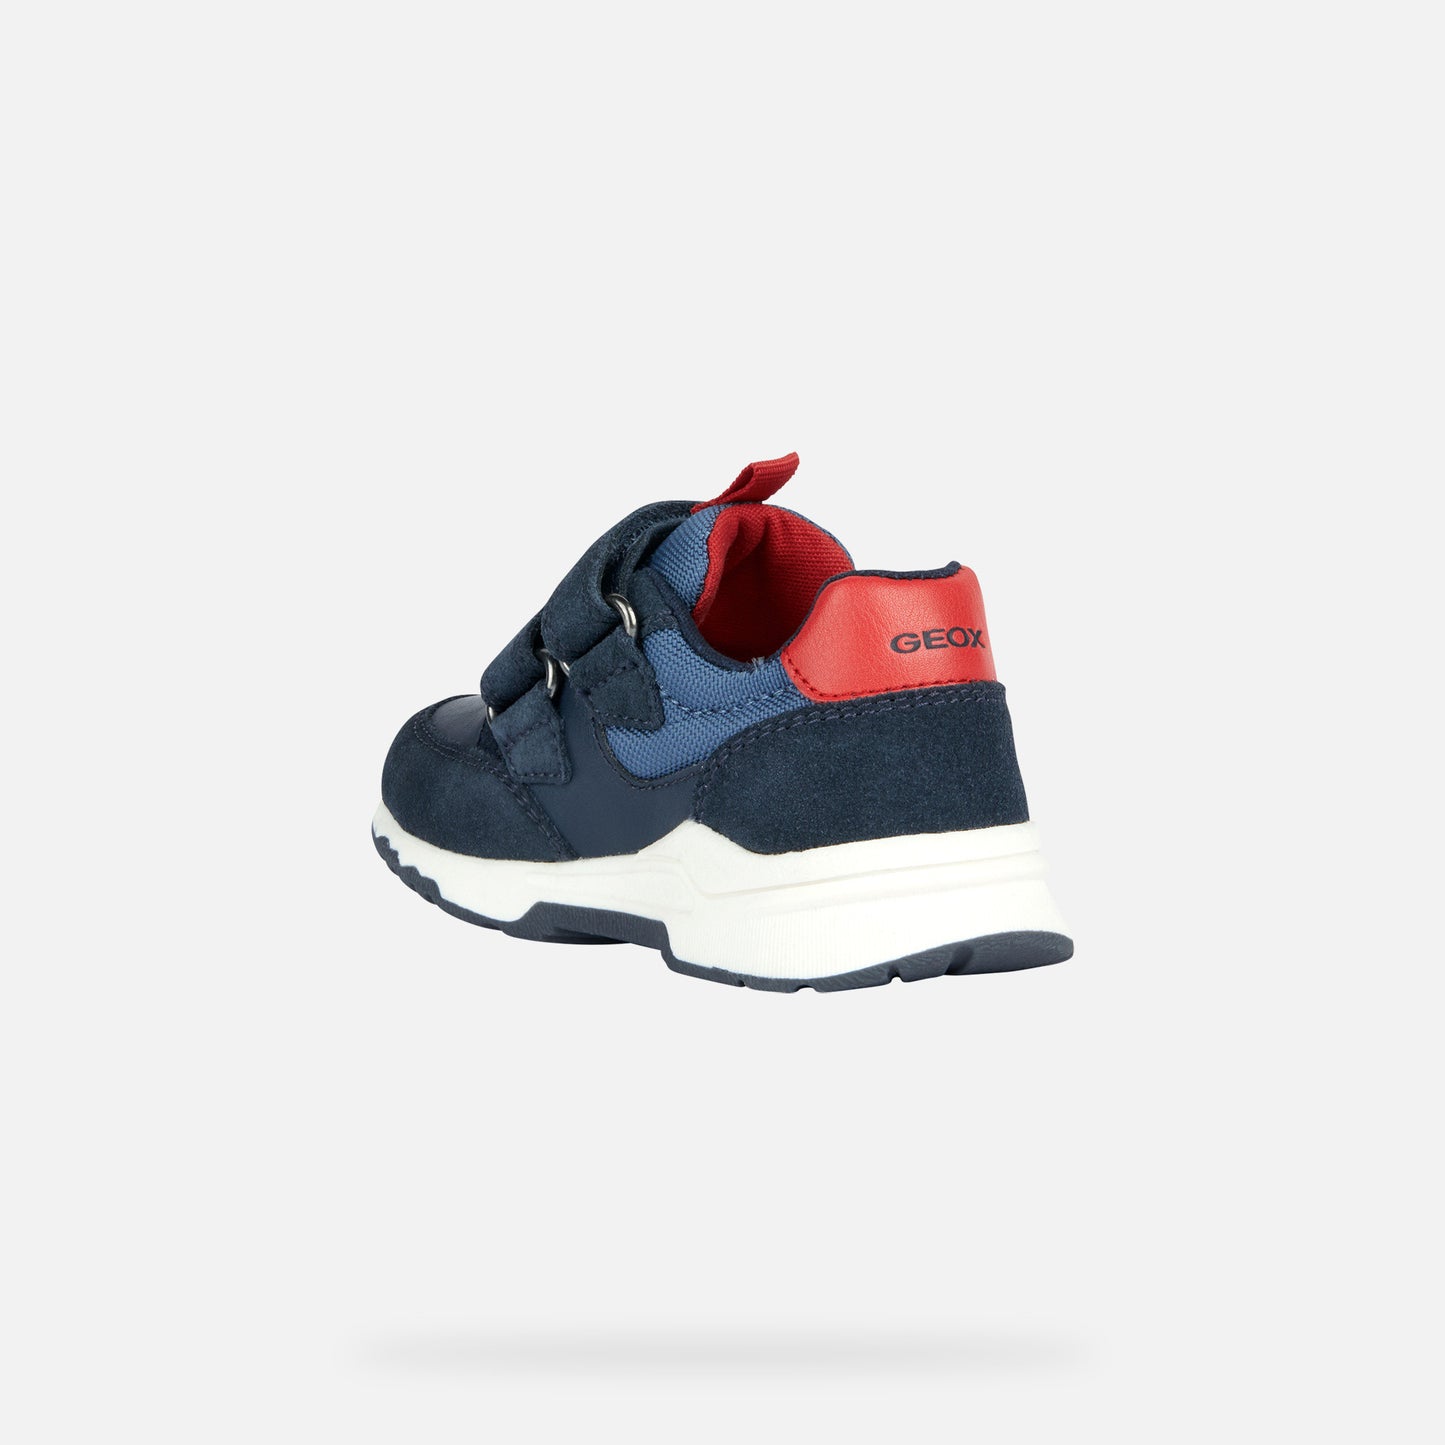 A casual sports trainer by Geox, style B Pyrip Boy, in navy suede/ other material with red heel and tab and light grey star outline on the side. Double velcro fastening. Inner side angled view.